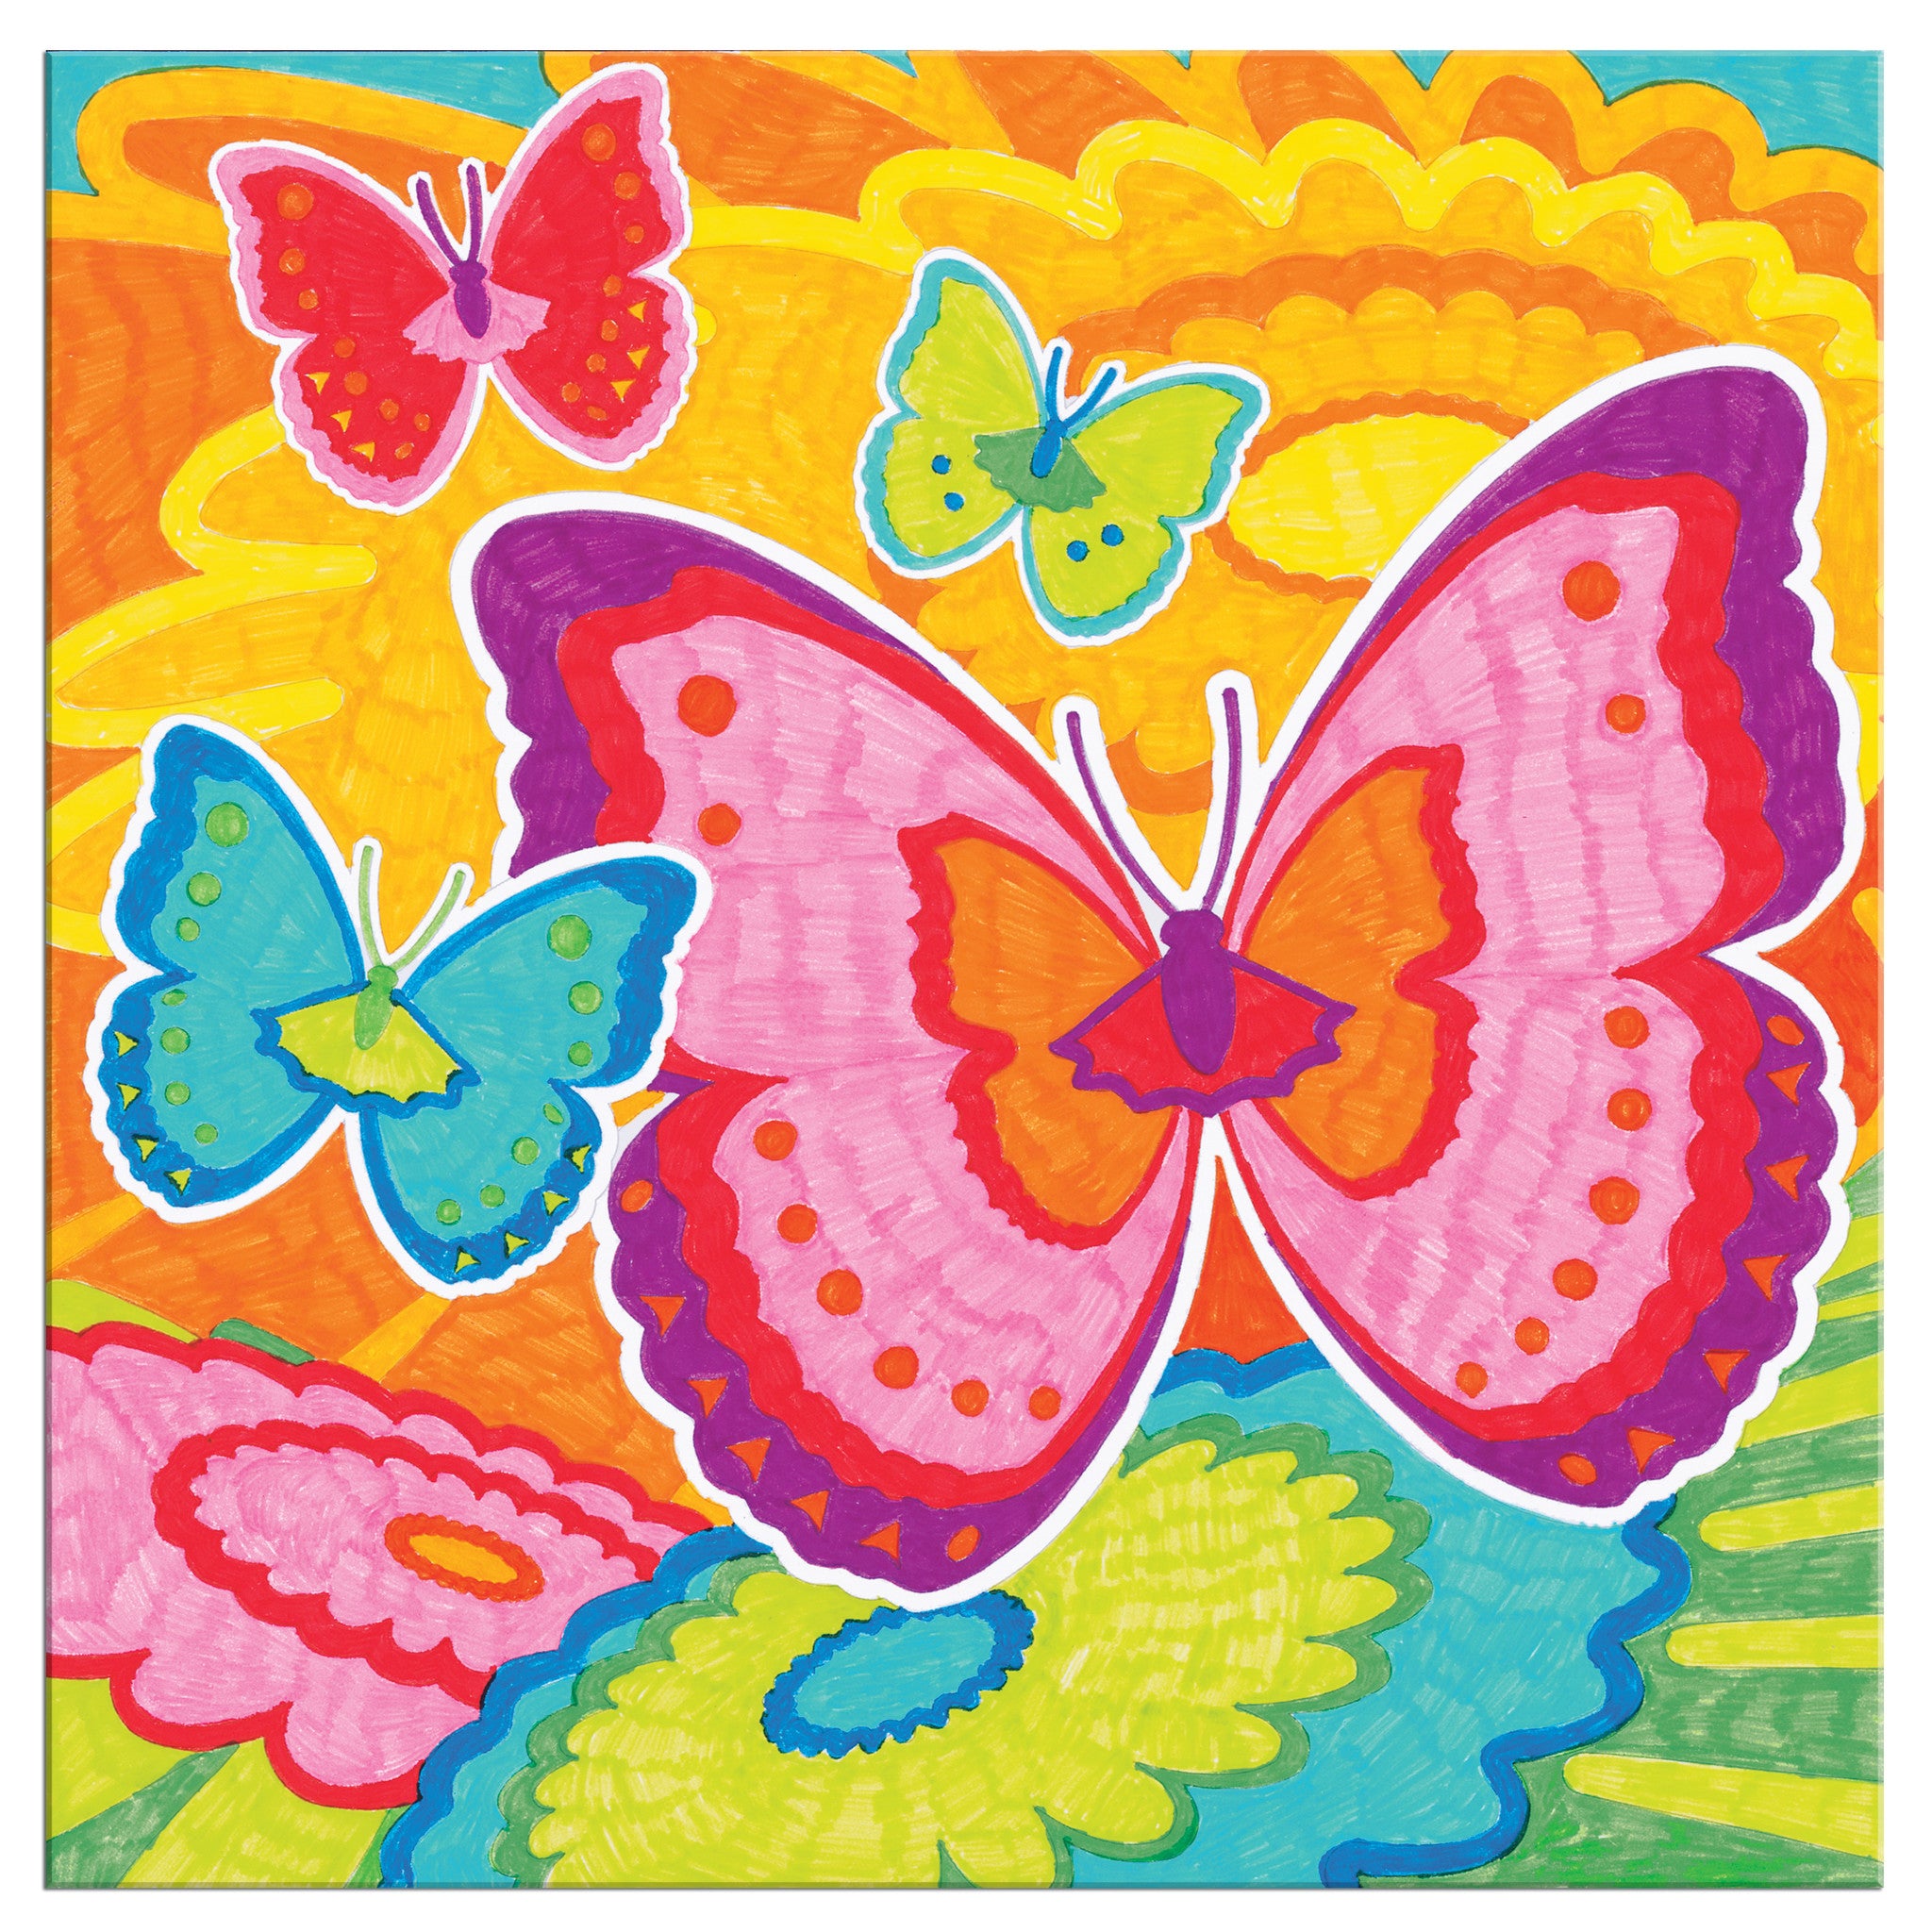 Butterflies Color by Number Coloring Book for Kids: Butterflies Paint by  Number Pages Book for Children - Butterflies Paint by Numbers for Girls  Relax (Paperback)